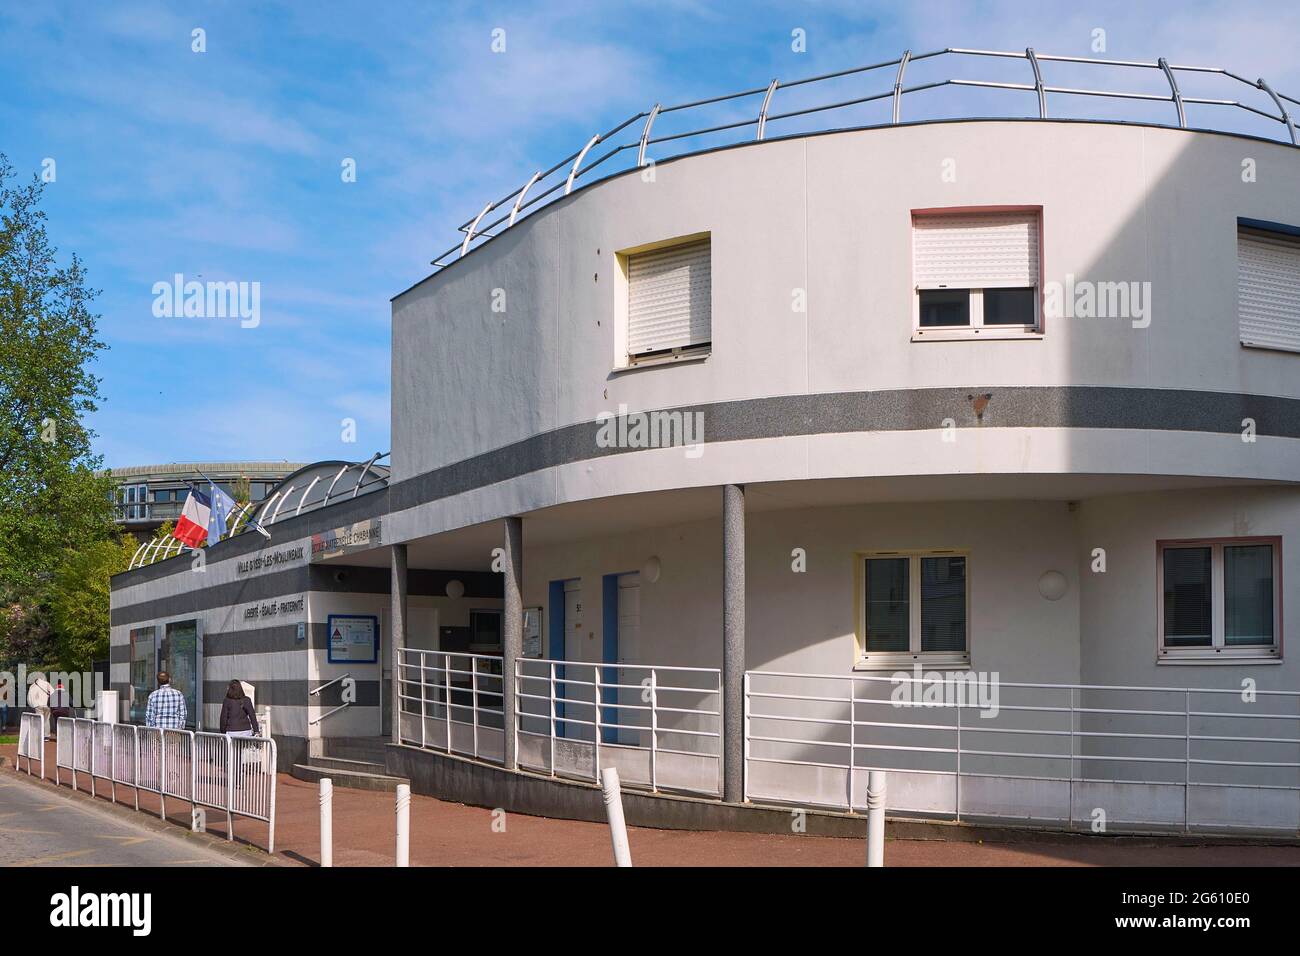 France, Hauts de Seine, Issy les Moulineaux, the the residential area of Saint Germain island, the infant school Stock Photo